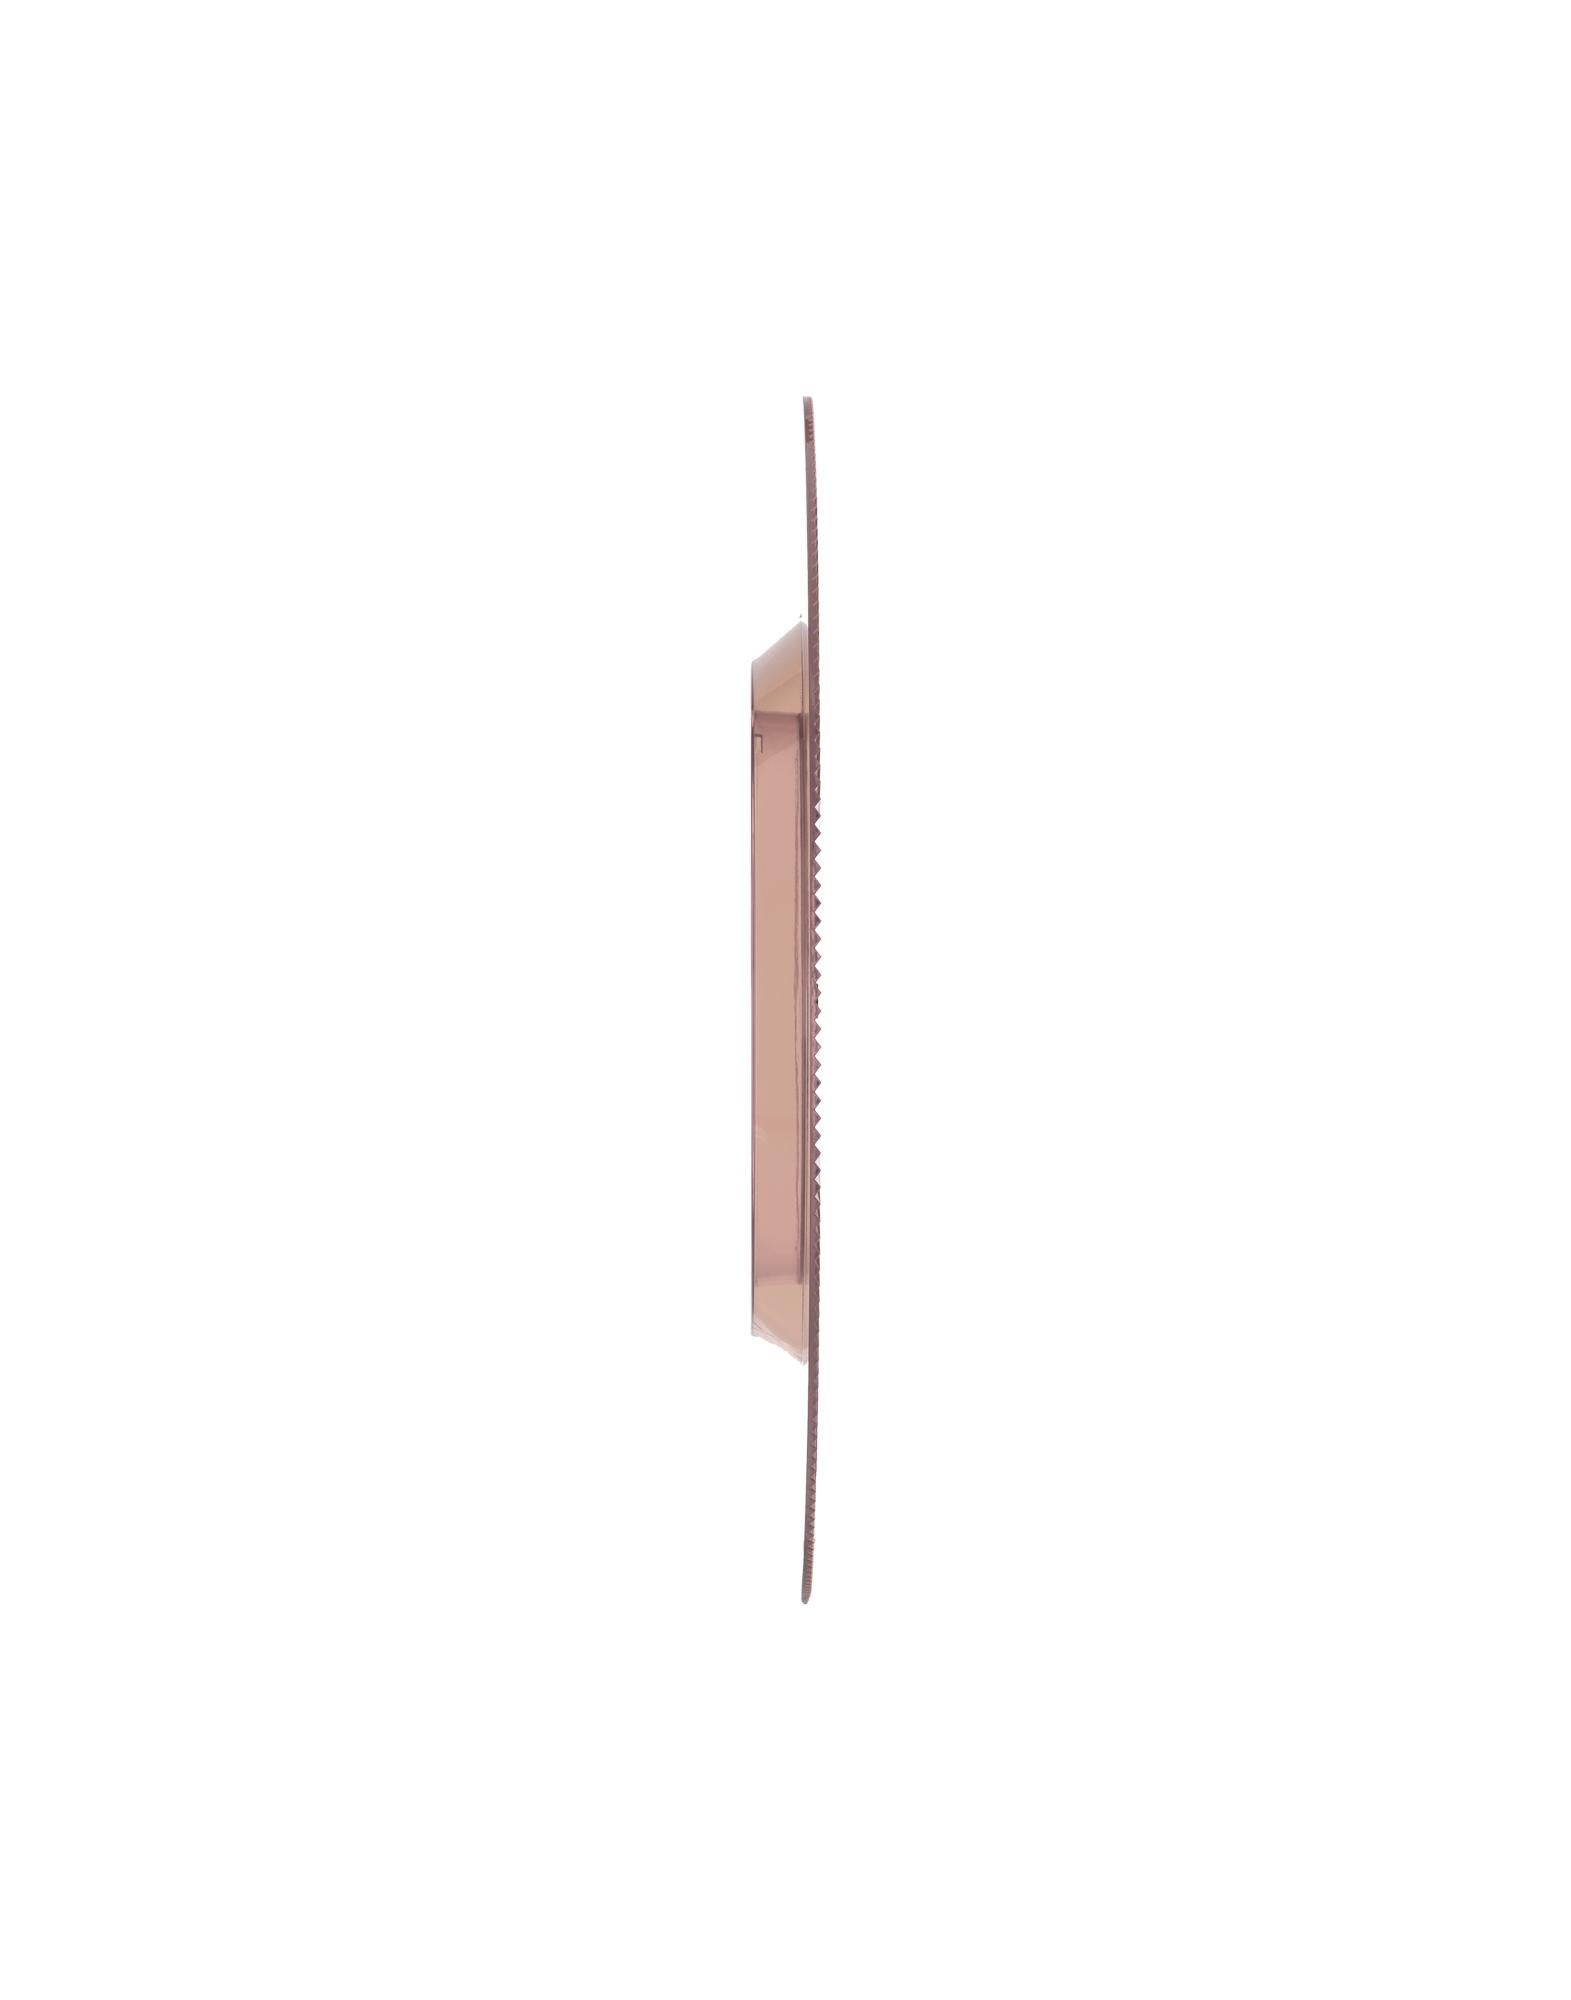 Modern Kartell All Saints Mirror in Copper by Ludovica and Roberto Palomba For Sale